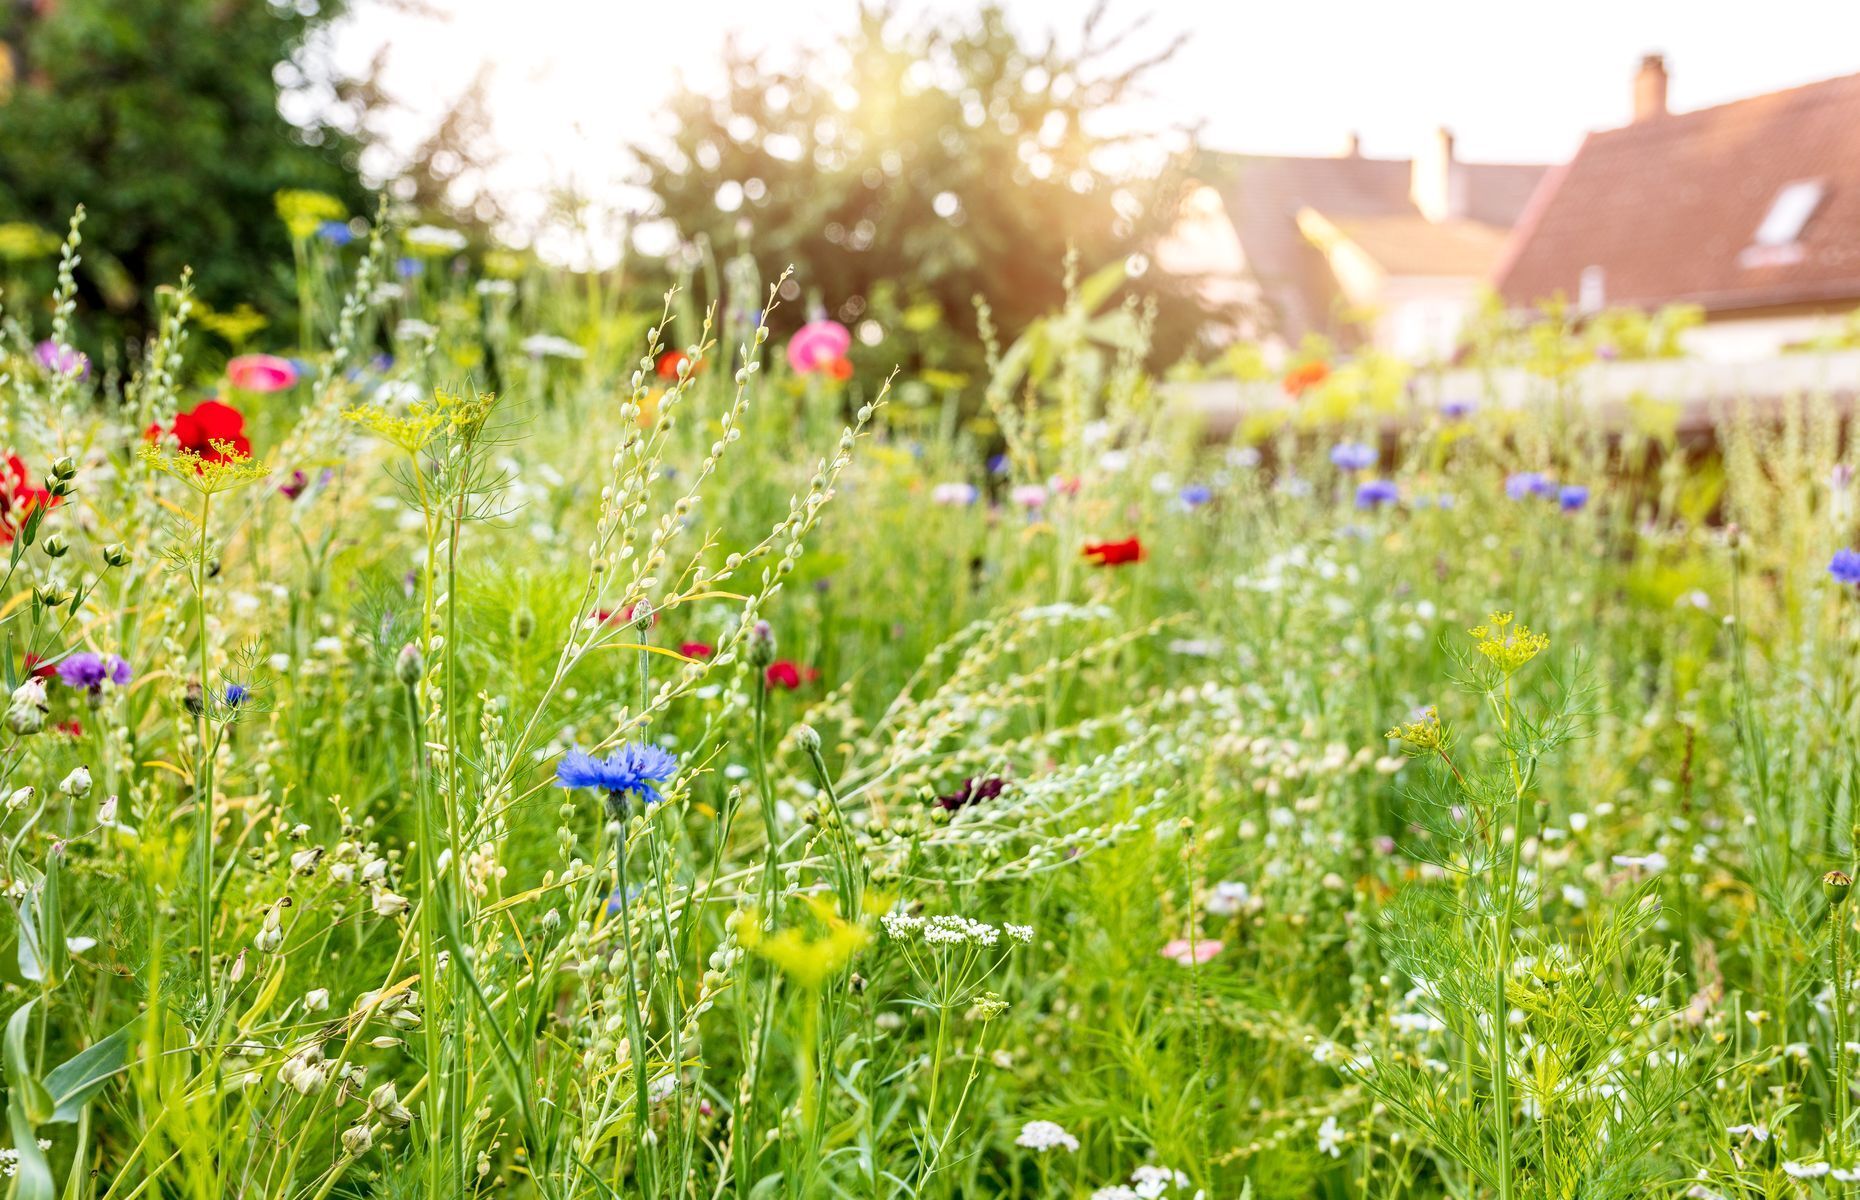 Incorporating variety into your lawn is good, but bees still need a chance to forage among the flowers. <a href="https://www.usda.gov/media/blog/2018/06/20/want-help-bees-take-break-lawn-mowing" rel="noreferrer noopener">Mowing every two weeks</a> rather than every weekend will also give you more time to enjoy the warm weather.